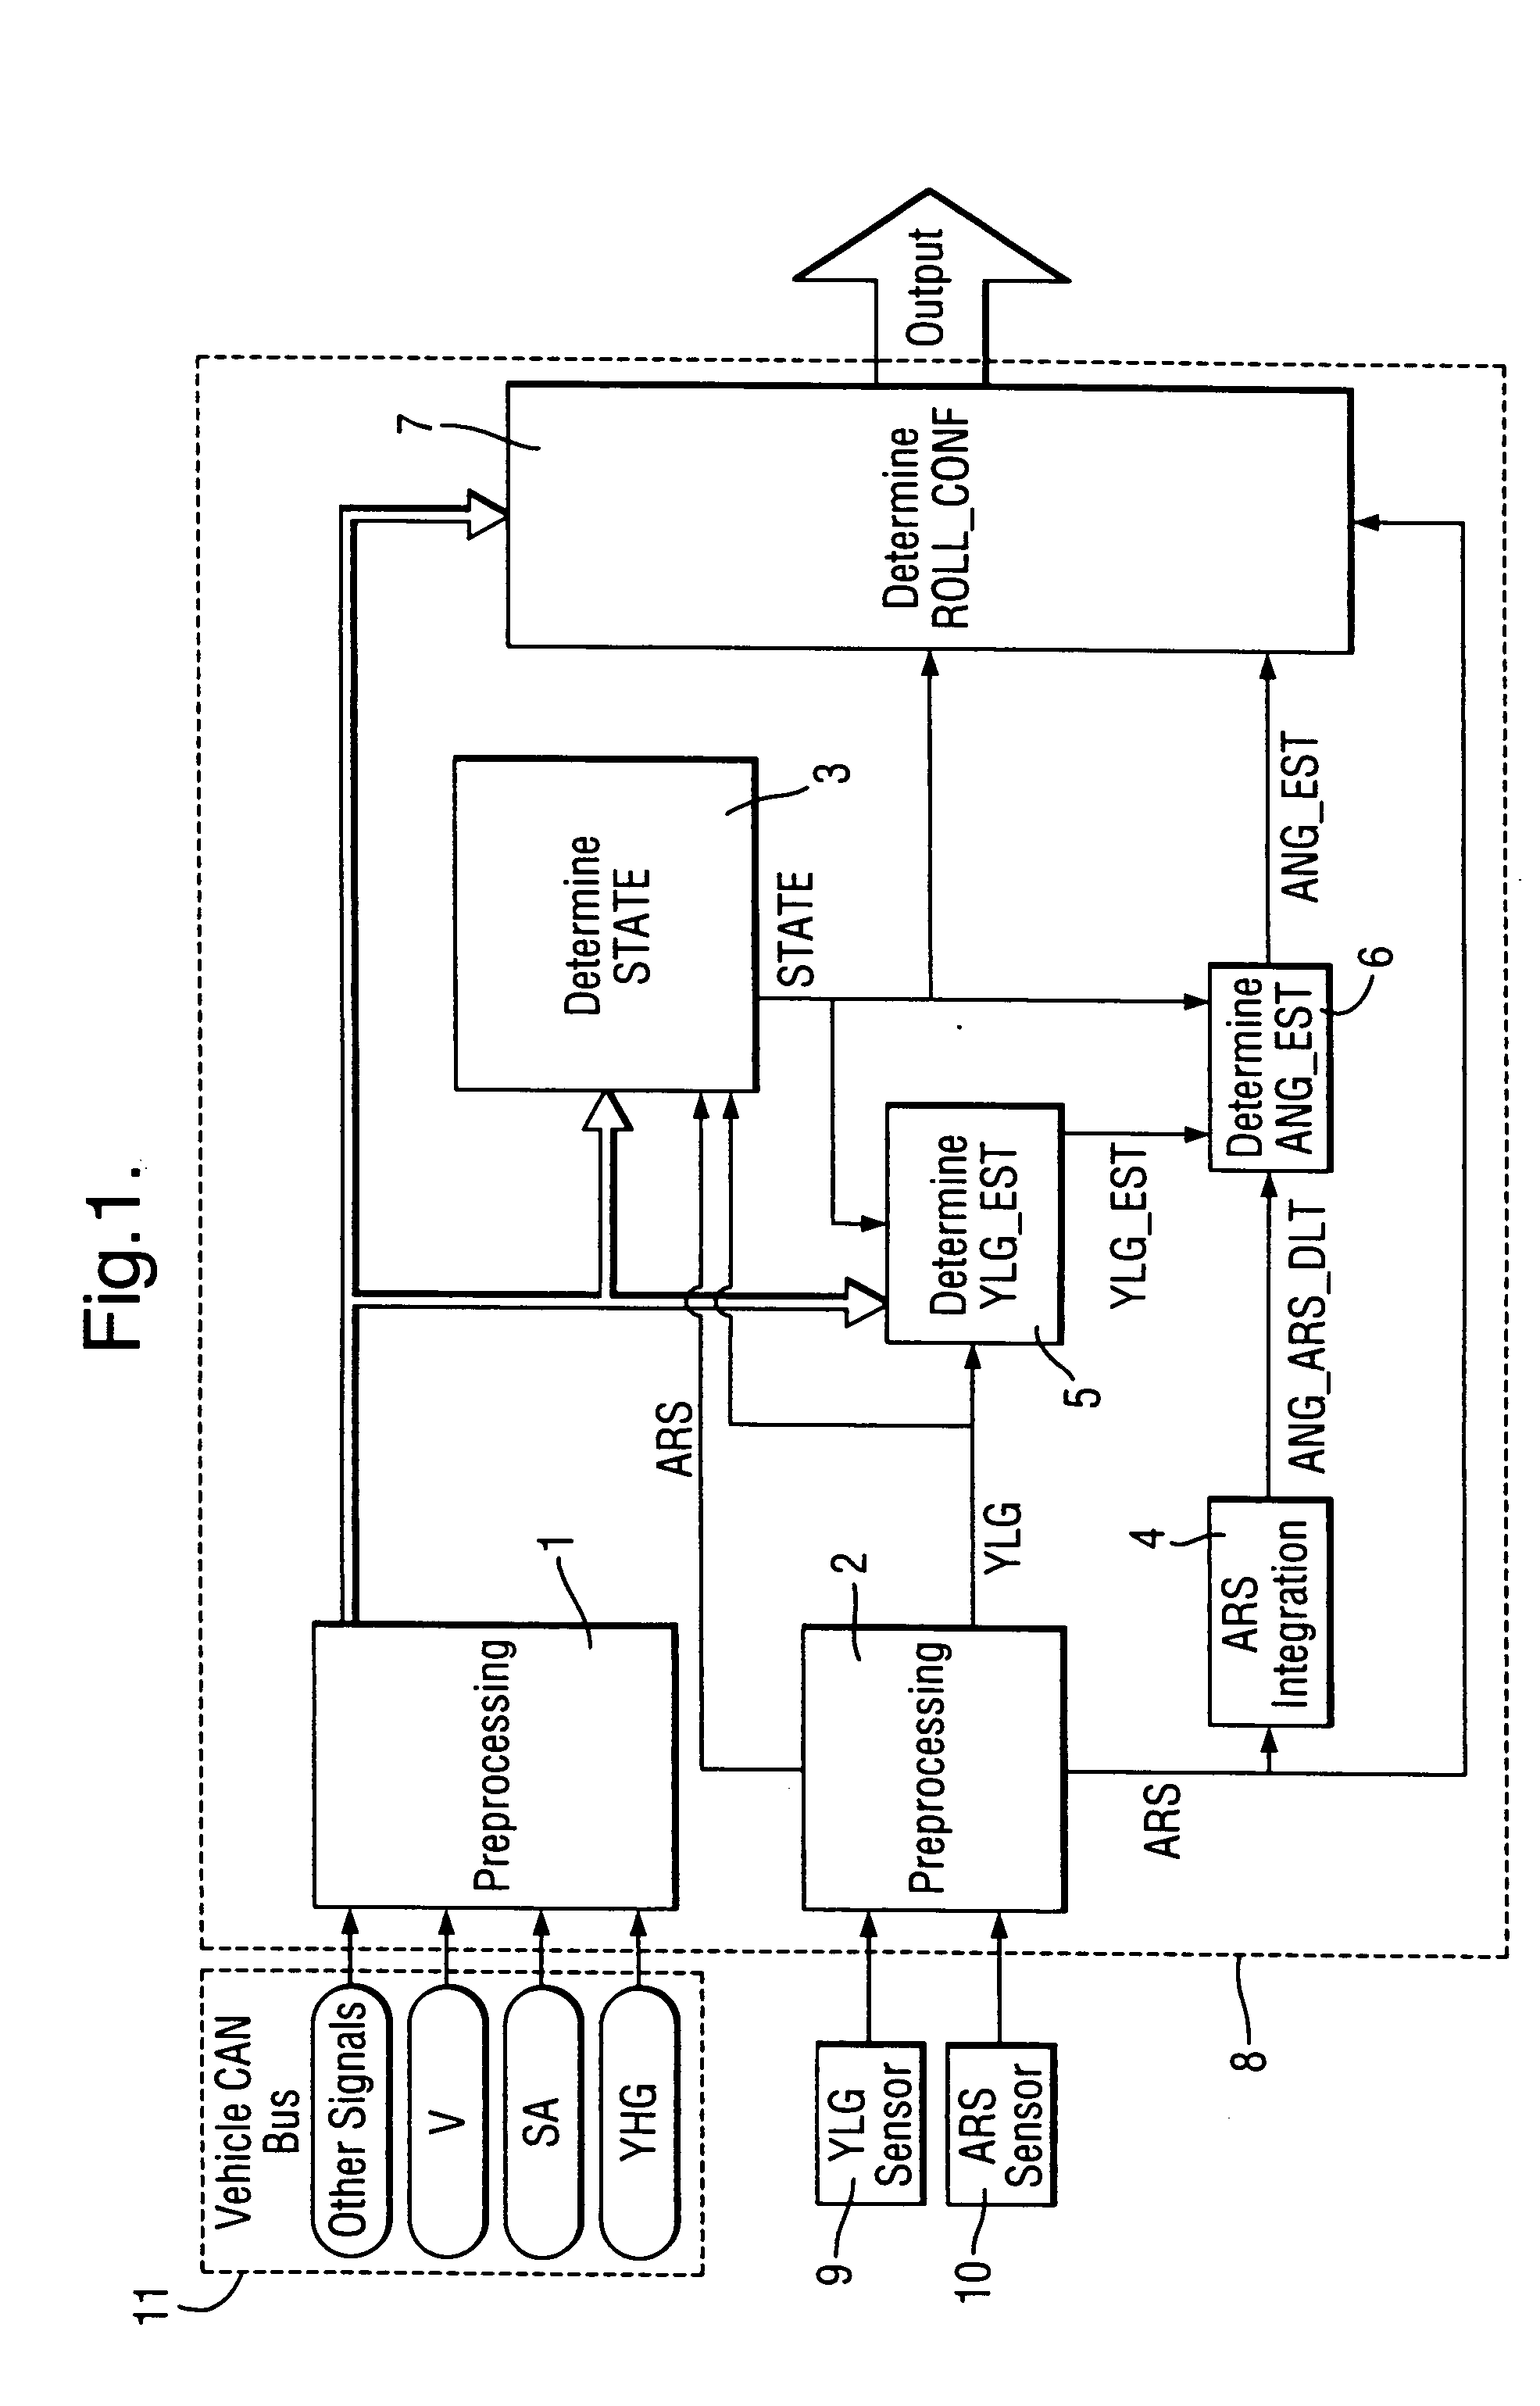 Method and system for detecting a vehicle rollover